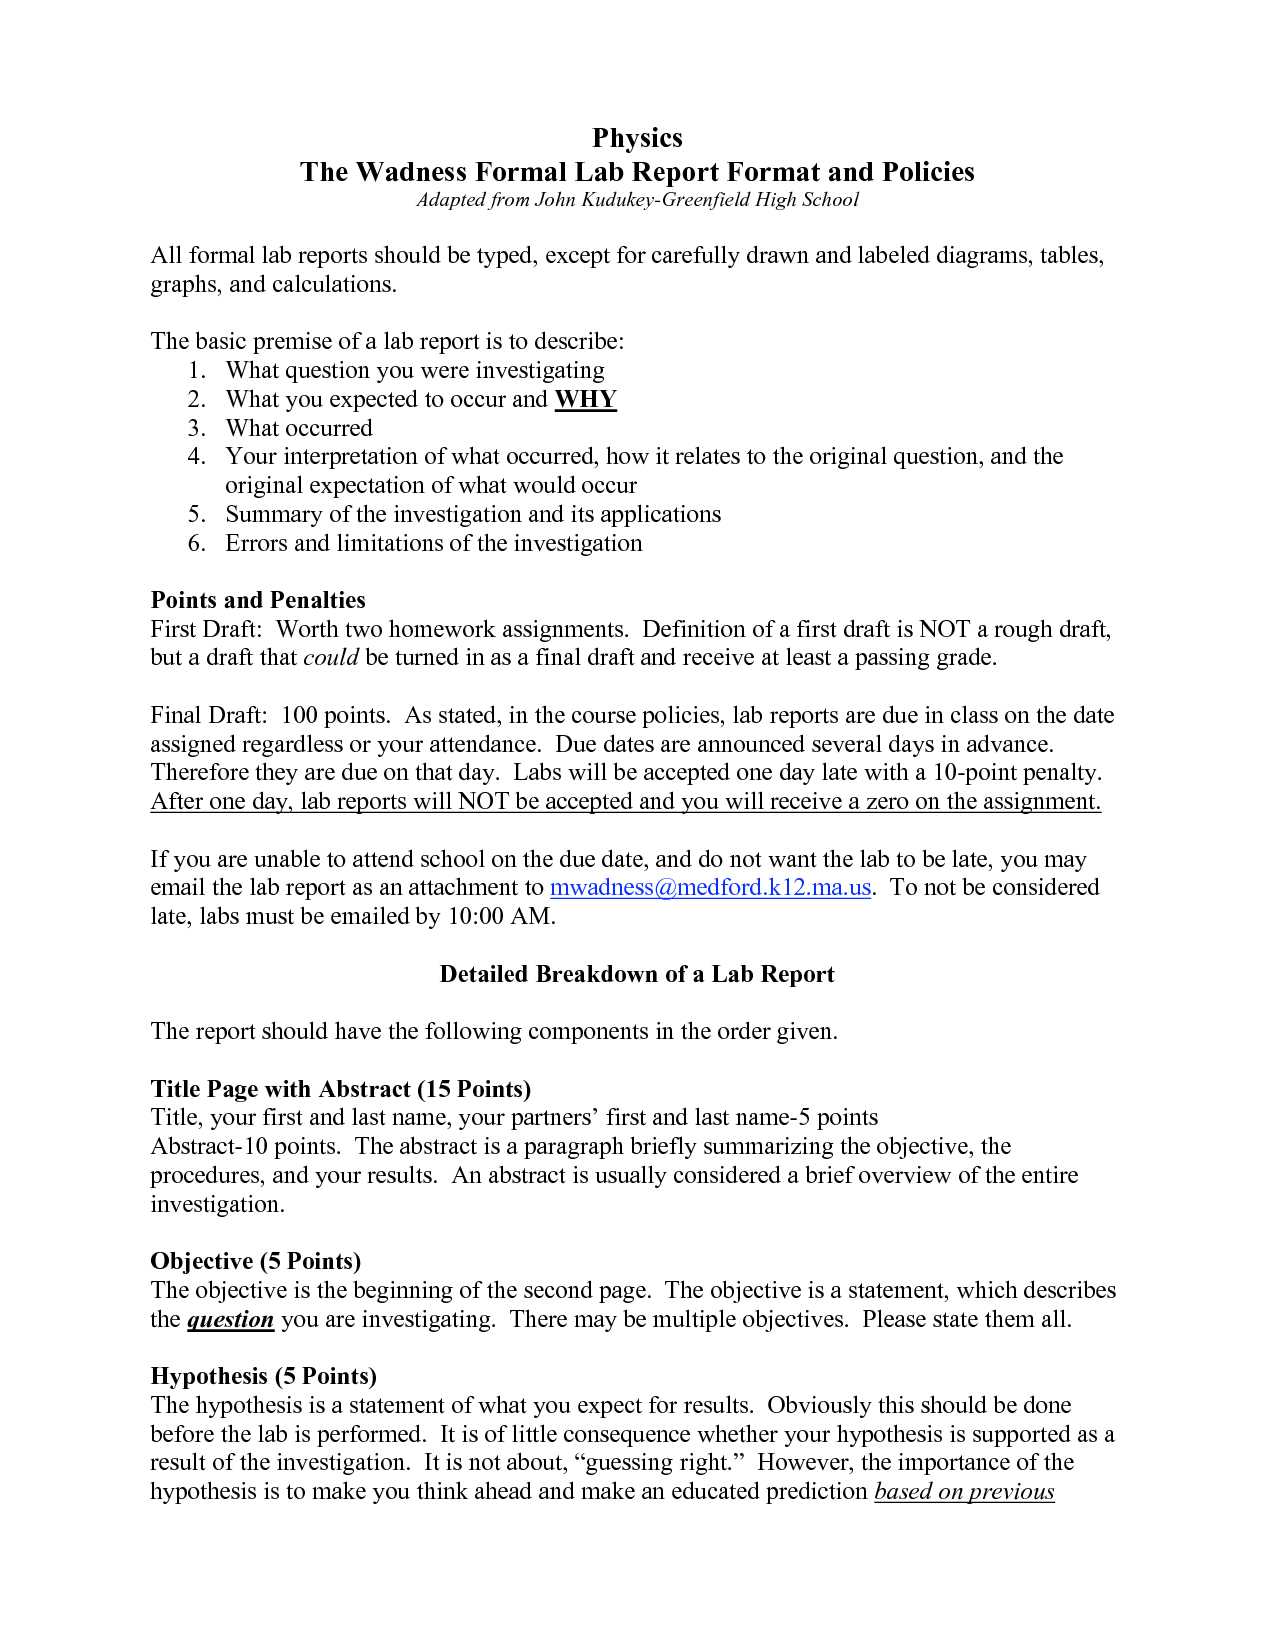 Formal Lab Report Template Physics : Biological Science In Science Experiment Report Template